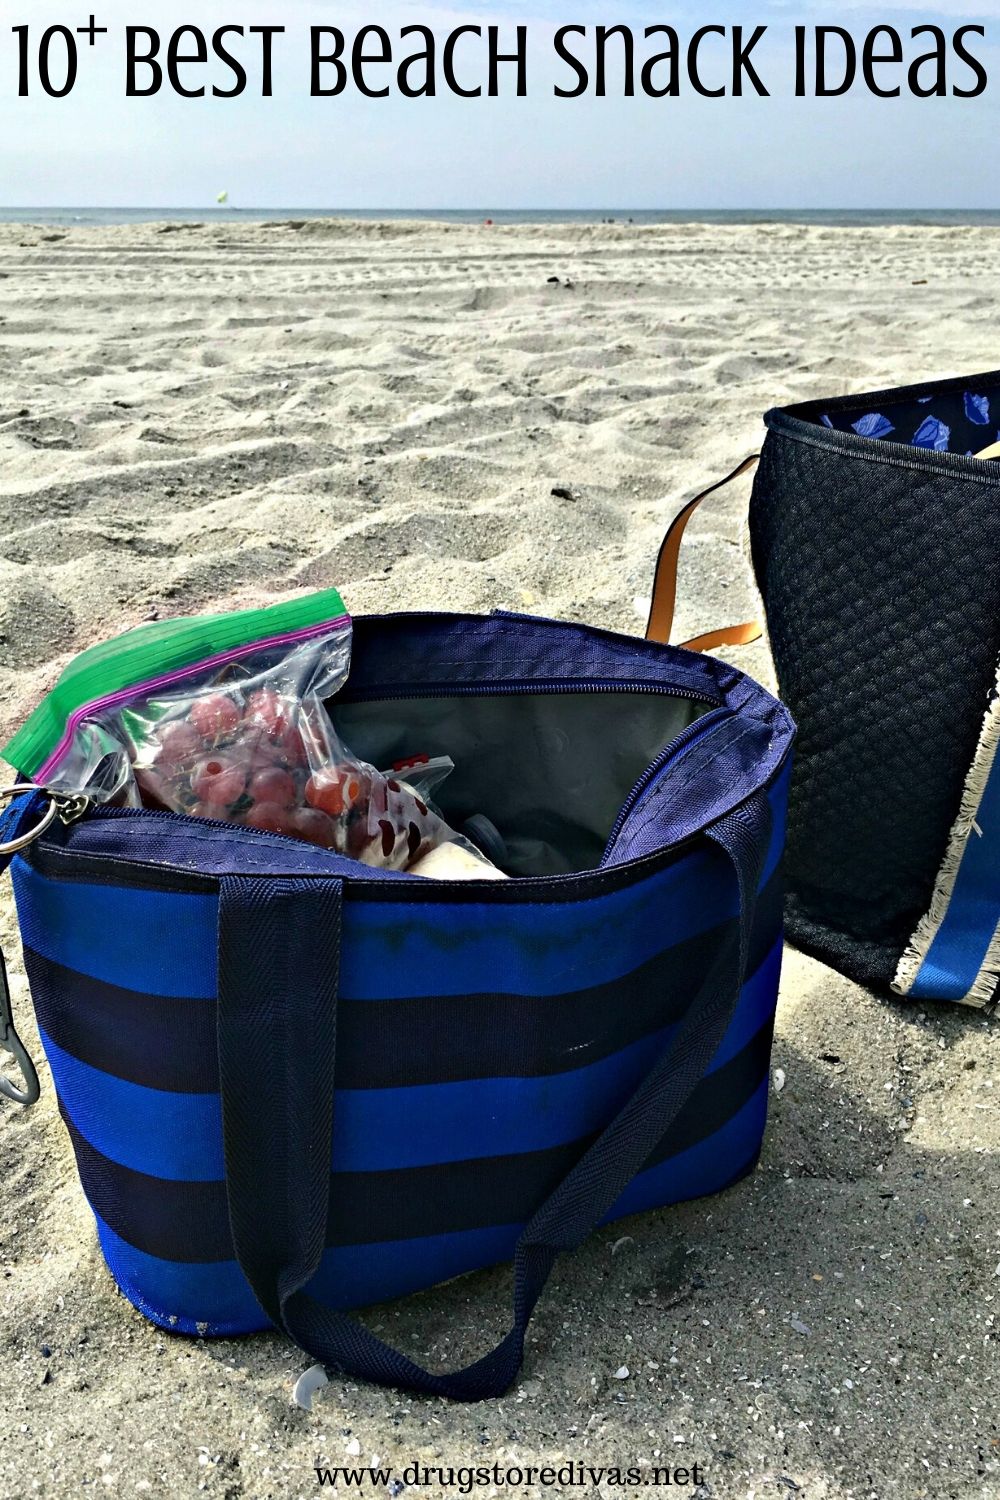 Planning a trip to the beach? Don't pack potato chips! Check out these 10+ Best Beach Snack Ideas that you can pack instead (from www.drugstoredivas.net).